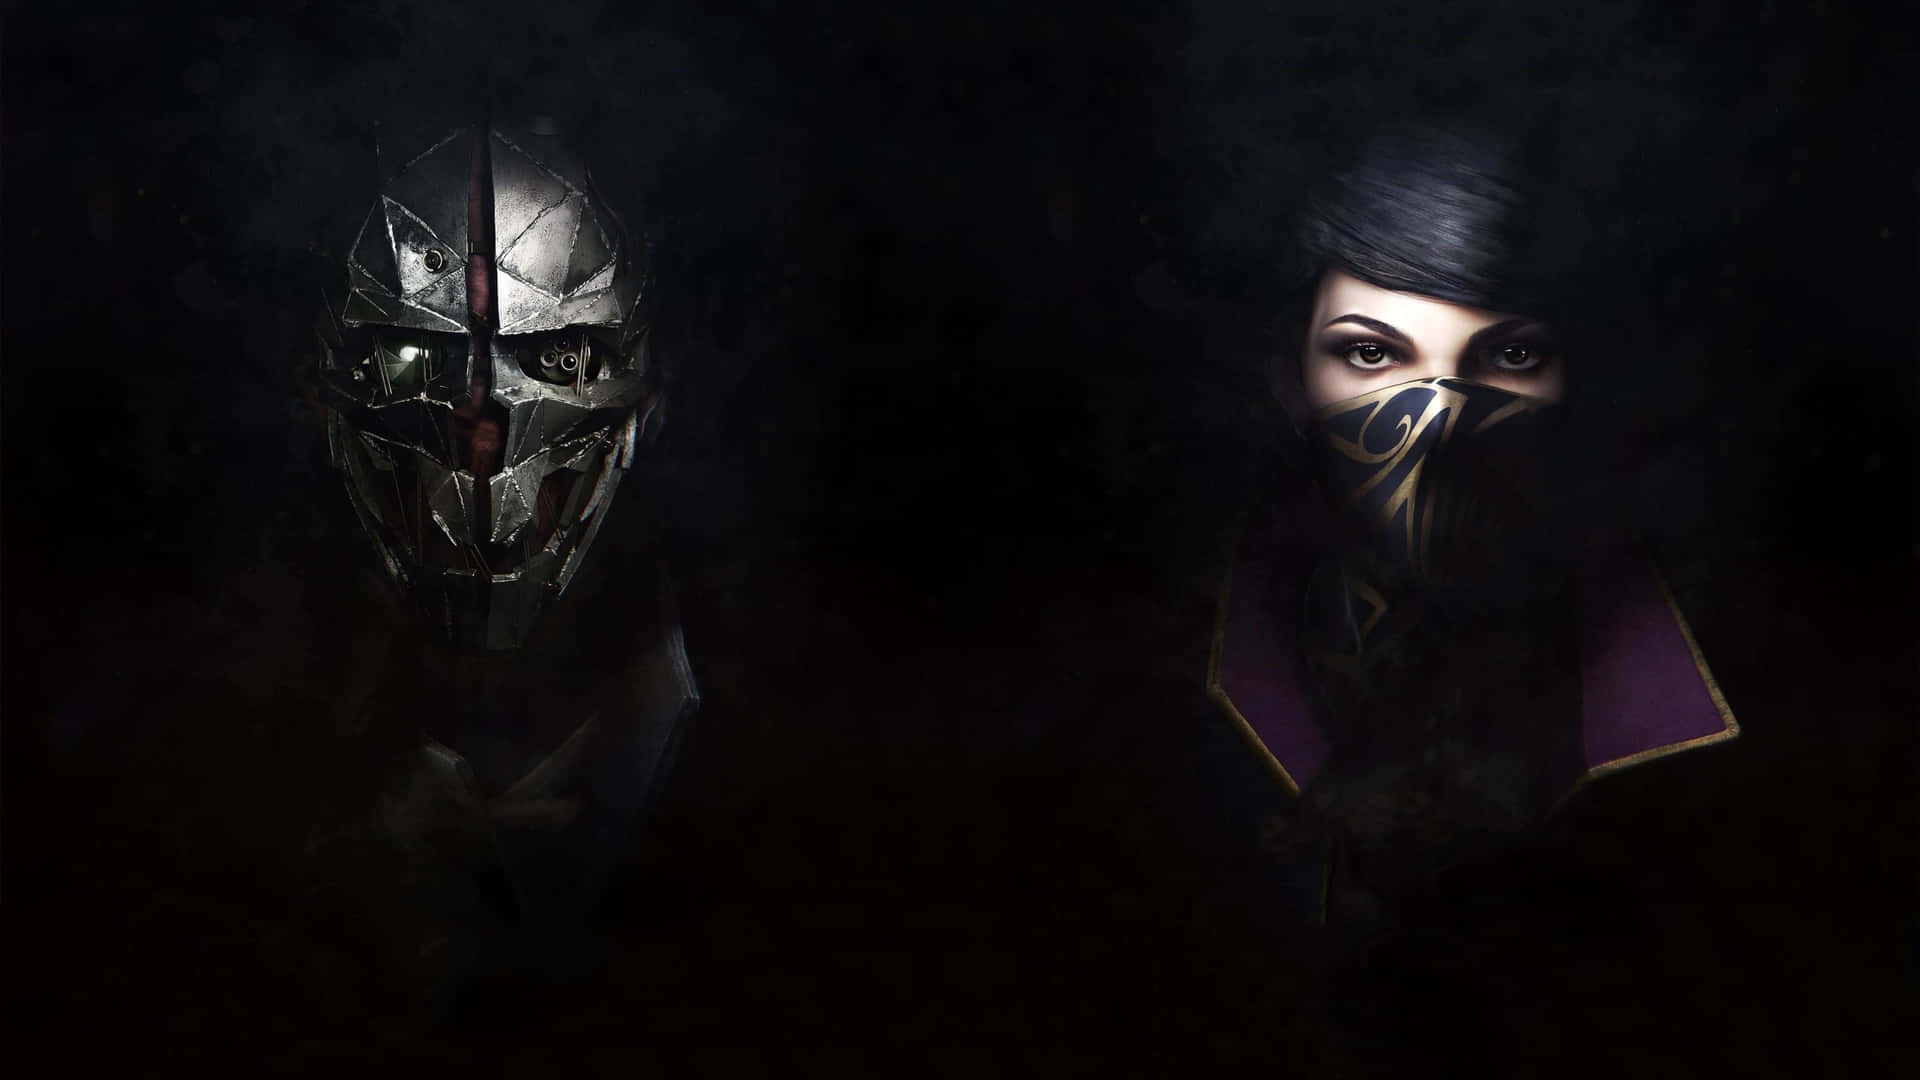 "Harvest the Chaos of 4K Dishonored" Wallpaper